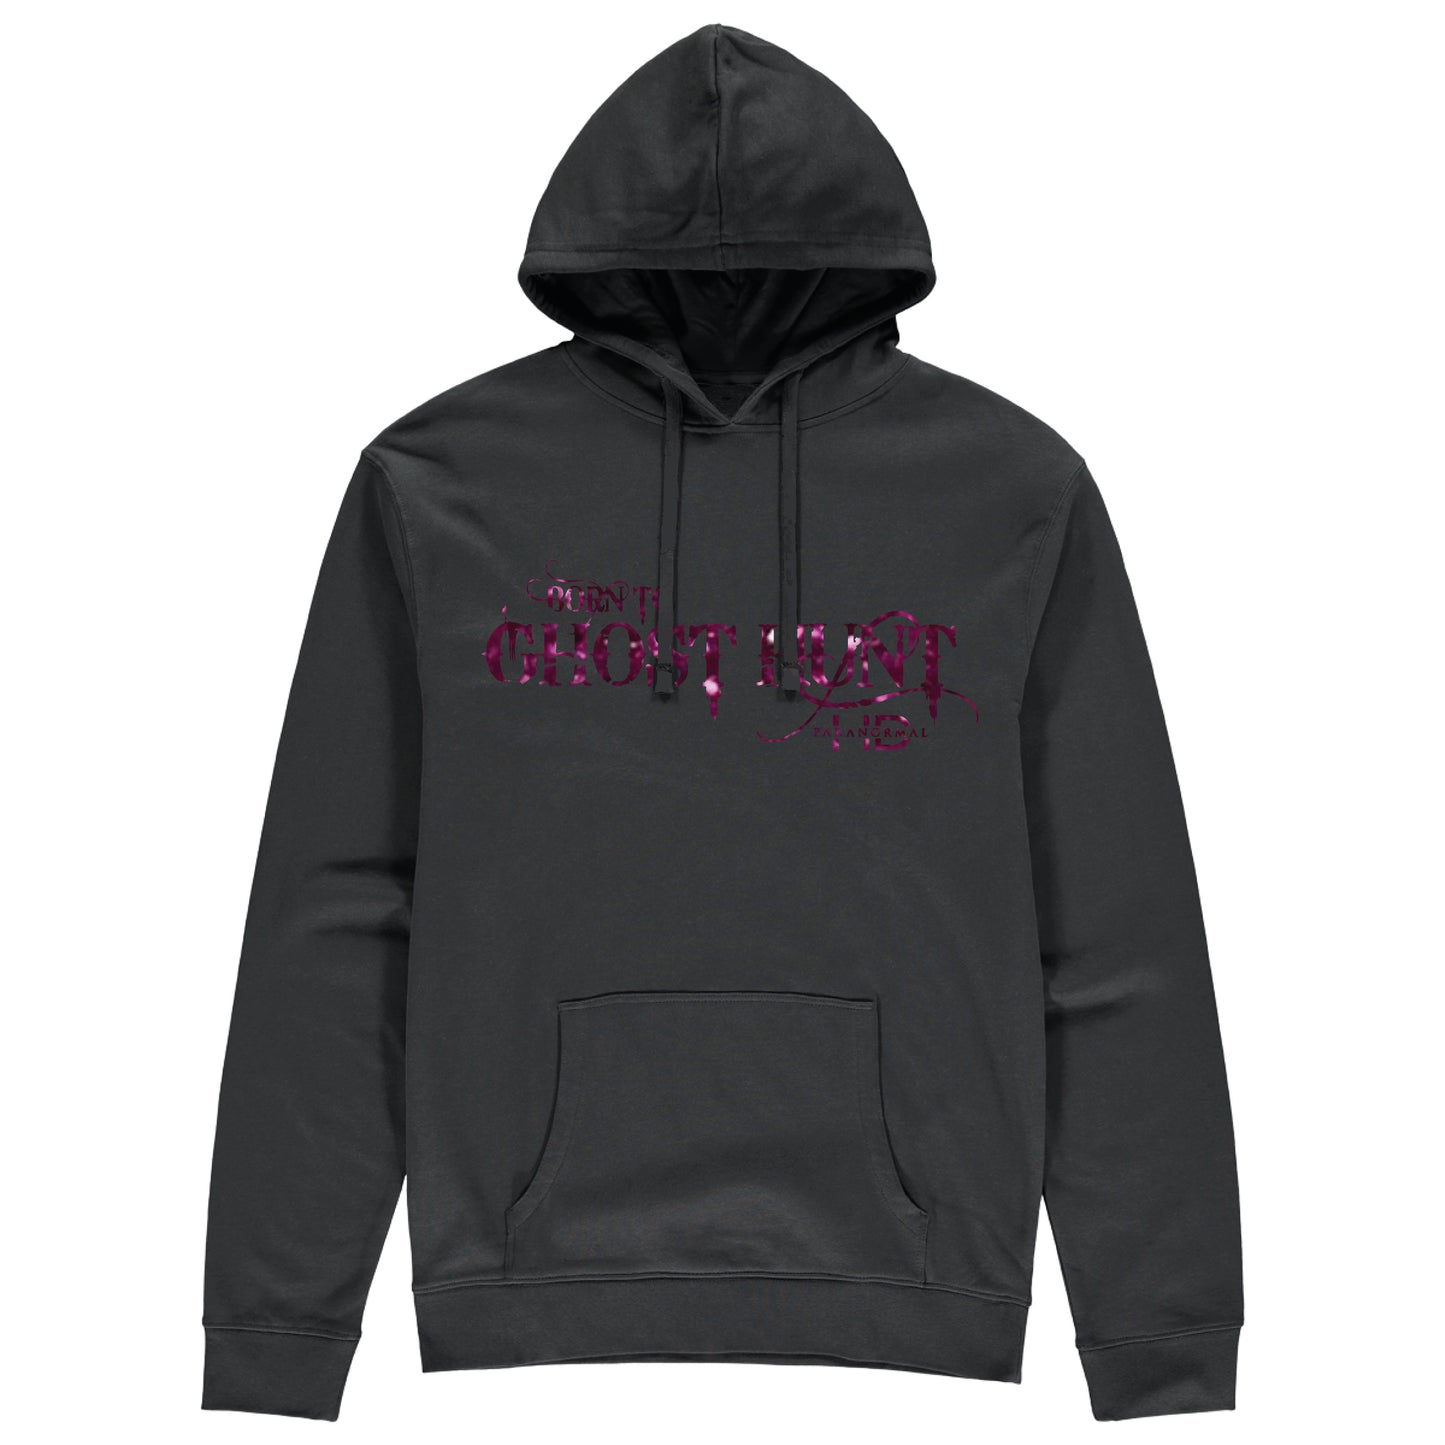 Born To Ghost Hunt Glitter Hoodie